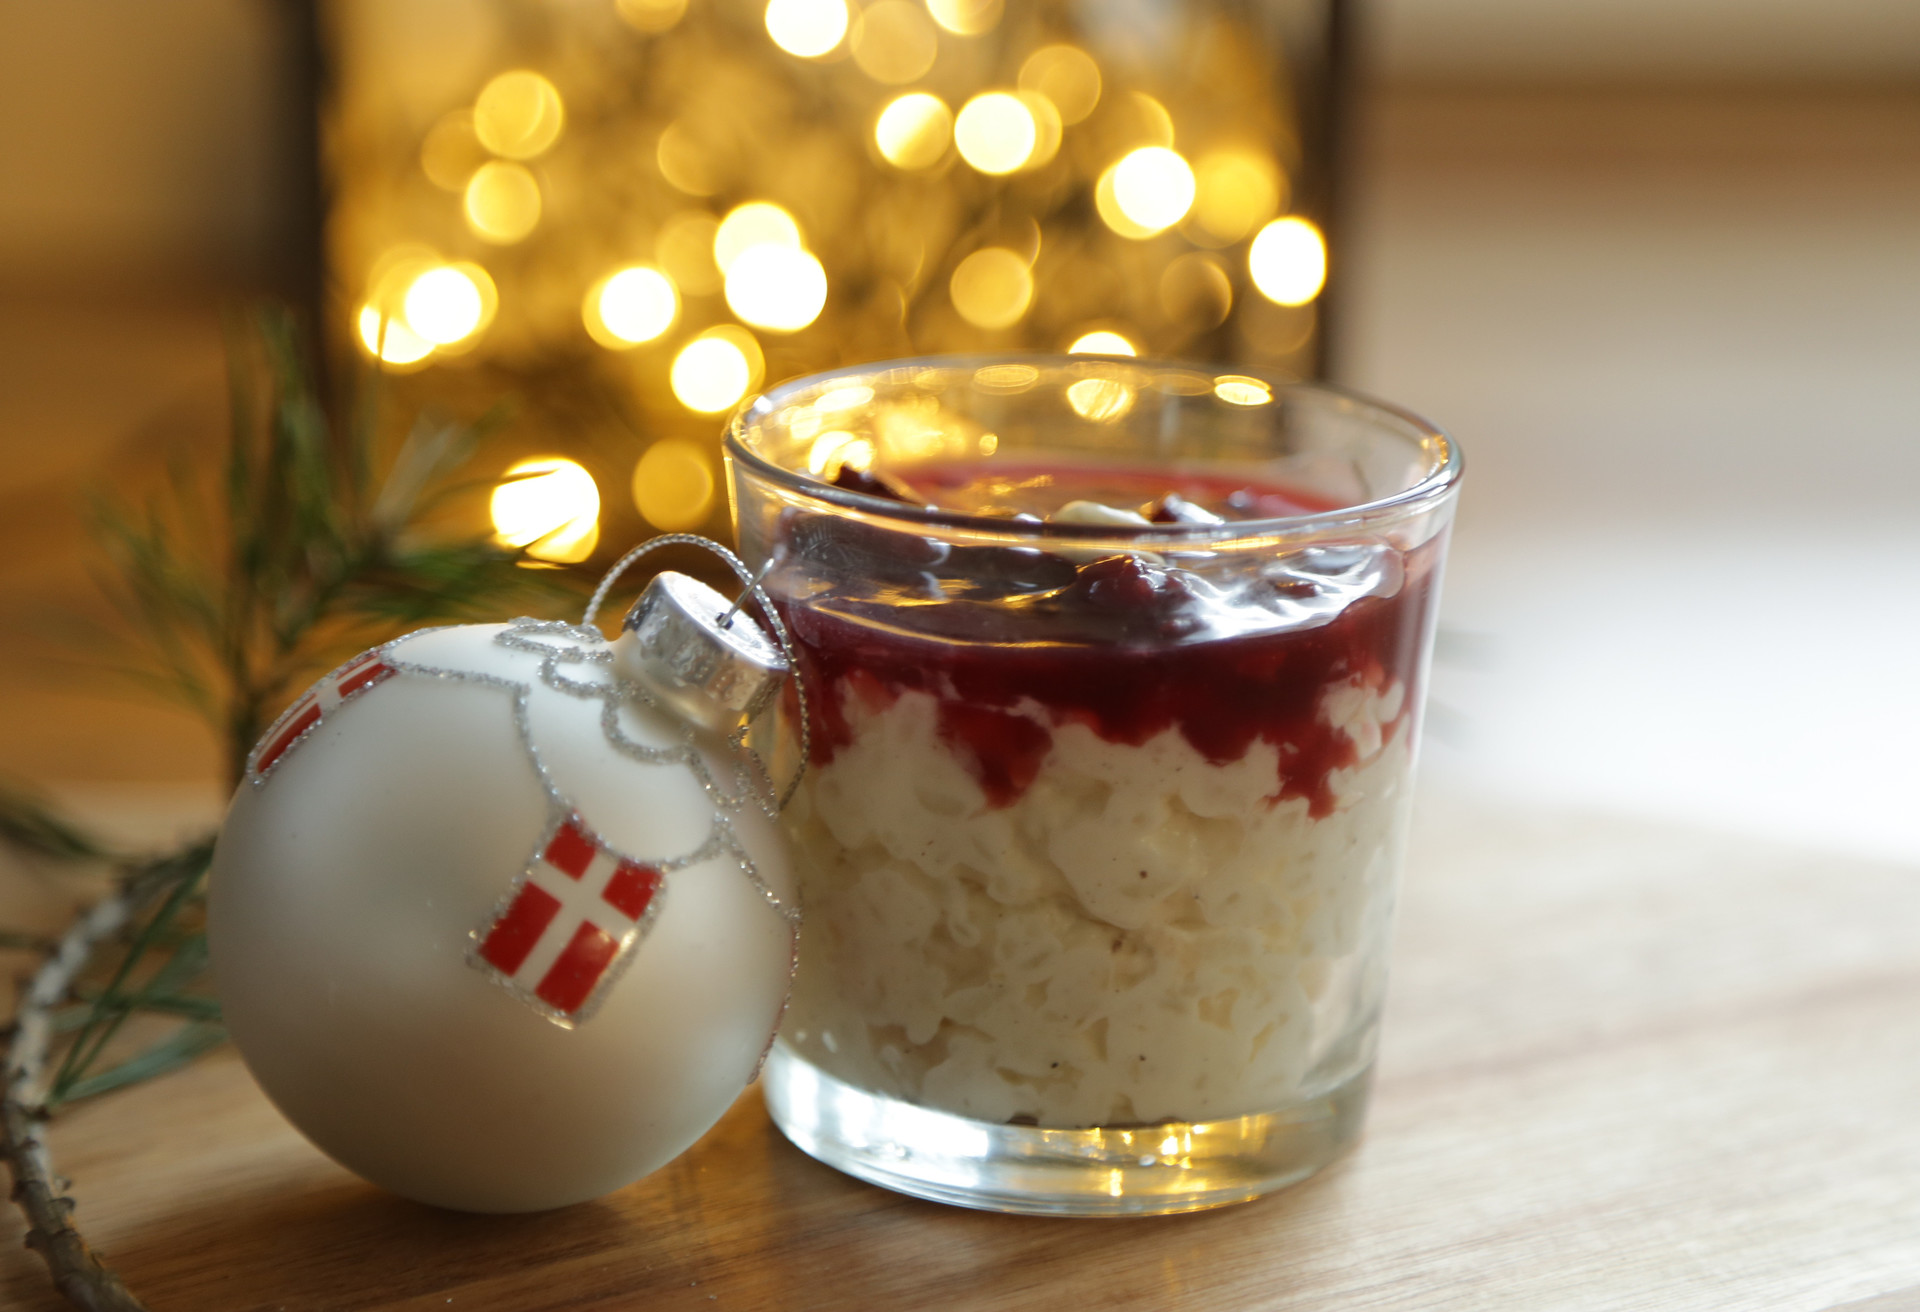 The Danish rice desert with almond and cherry   for Christmas eve names risalamande.; Shutterstock ID 1274671258; Purpose: Virtual Christmas Guides; Brand (KAYAK, Momondo, Any): Kayak; Client/Licensee: KAYAK